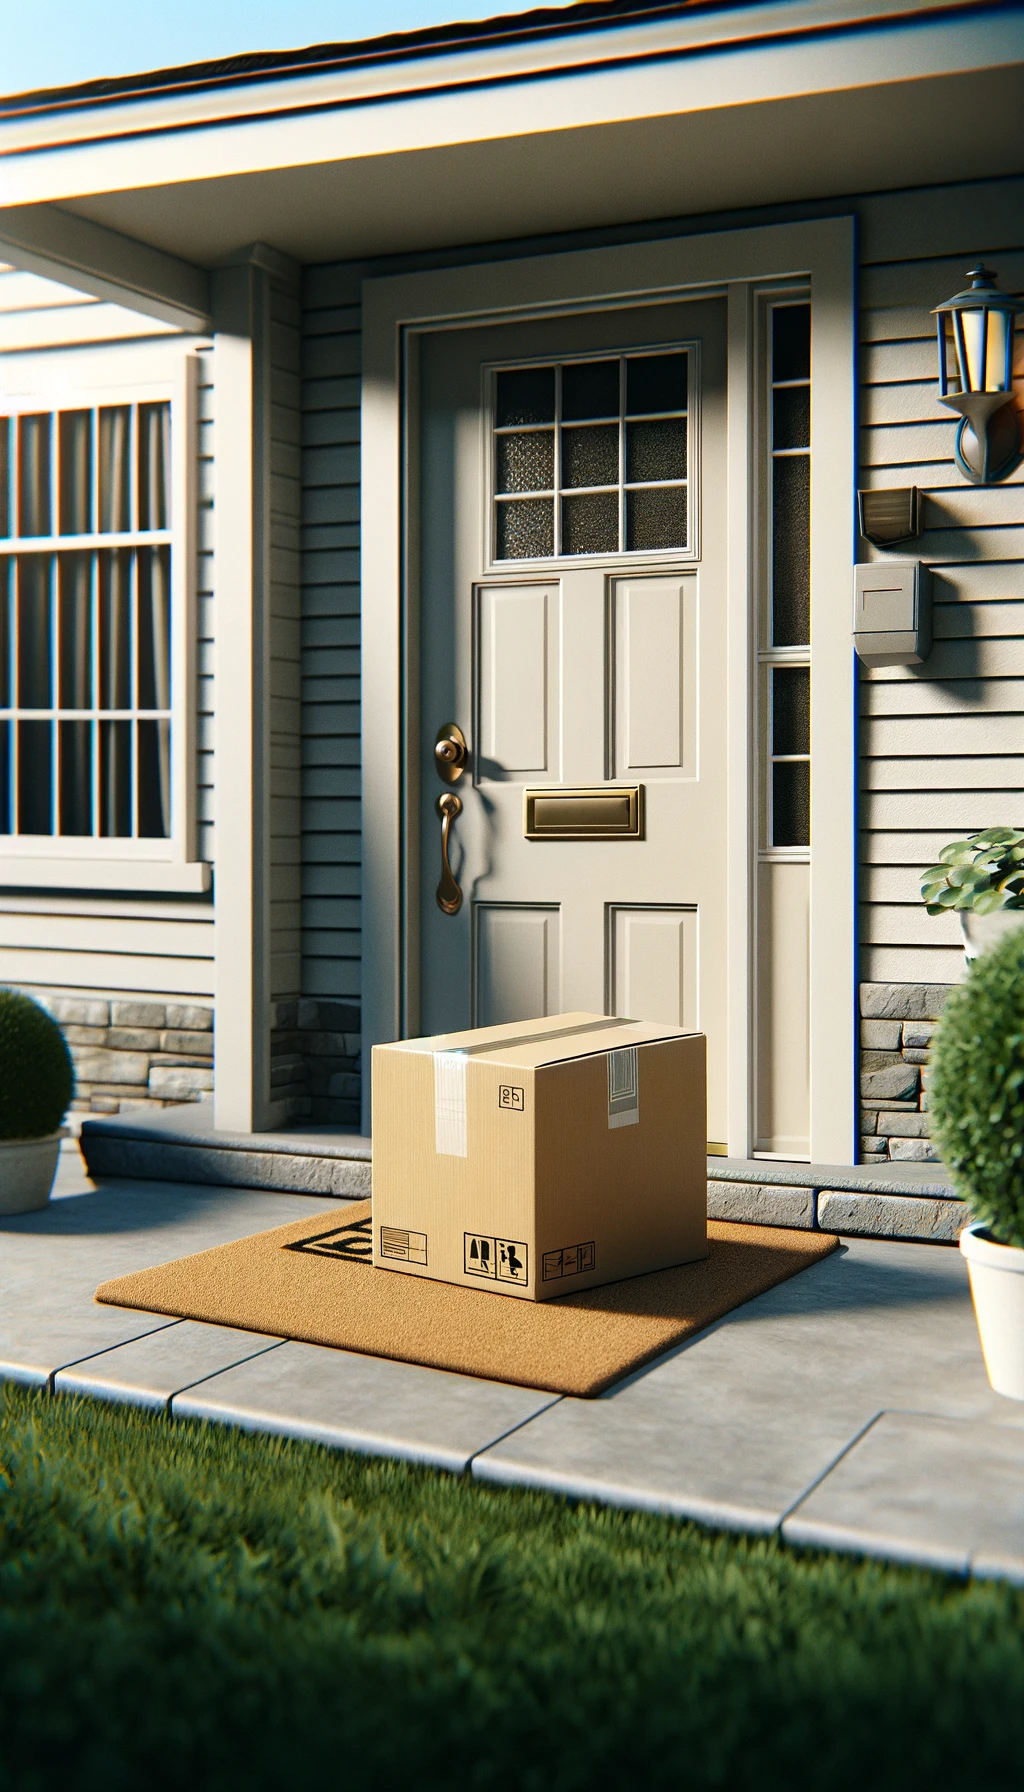 DALL·E 2024-01-23 12.13.56 - A realistic scene showing a box placed on the doorstep of a house. The image focuses on a front door of a typical suburban house. A medium-sized cardb